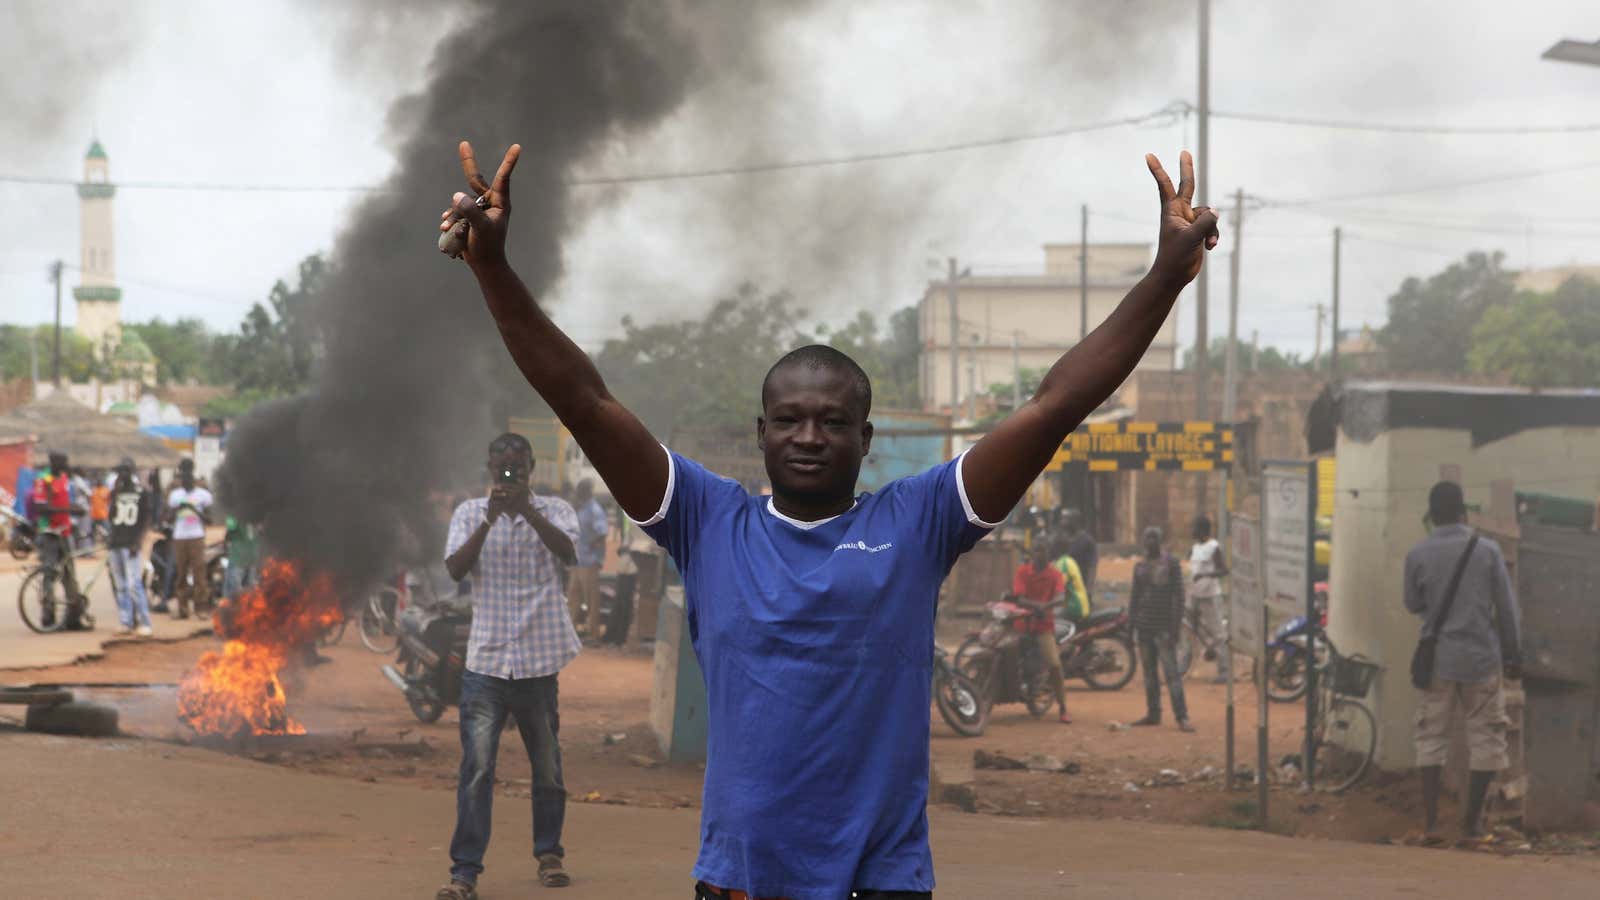 Protesters demonstrate against an ongoing military coup in Ouagadougou, Burkina Faso.